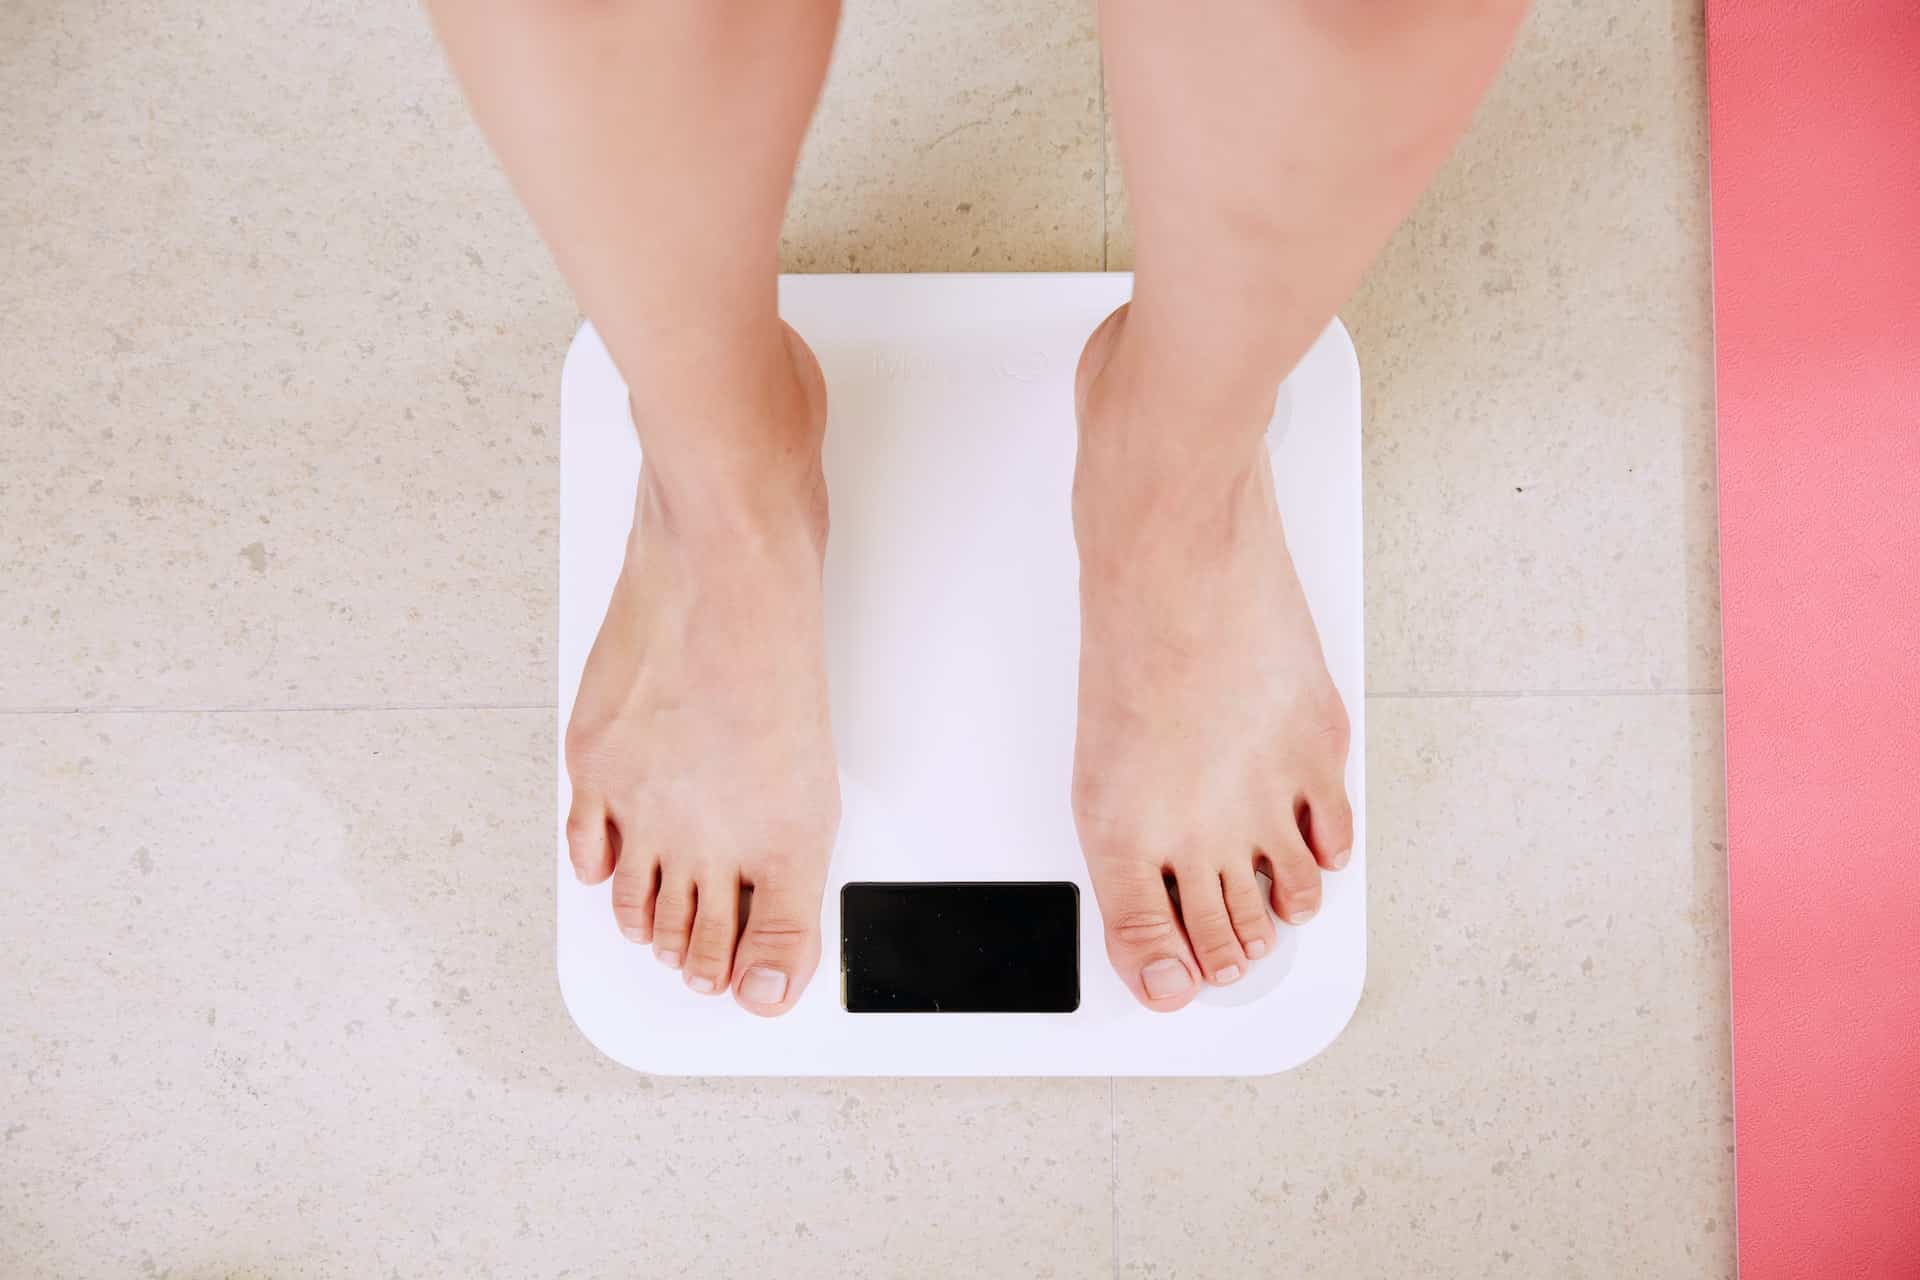 Woman stepping on a weighing scale on a tile floor. No number is appearing on the scale.